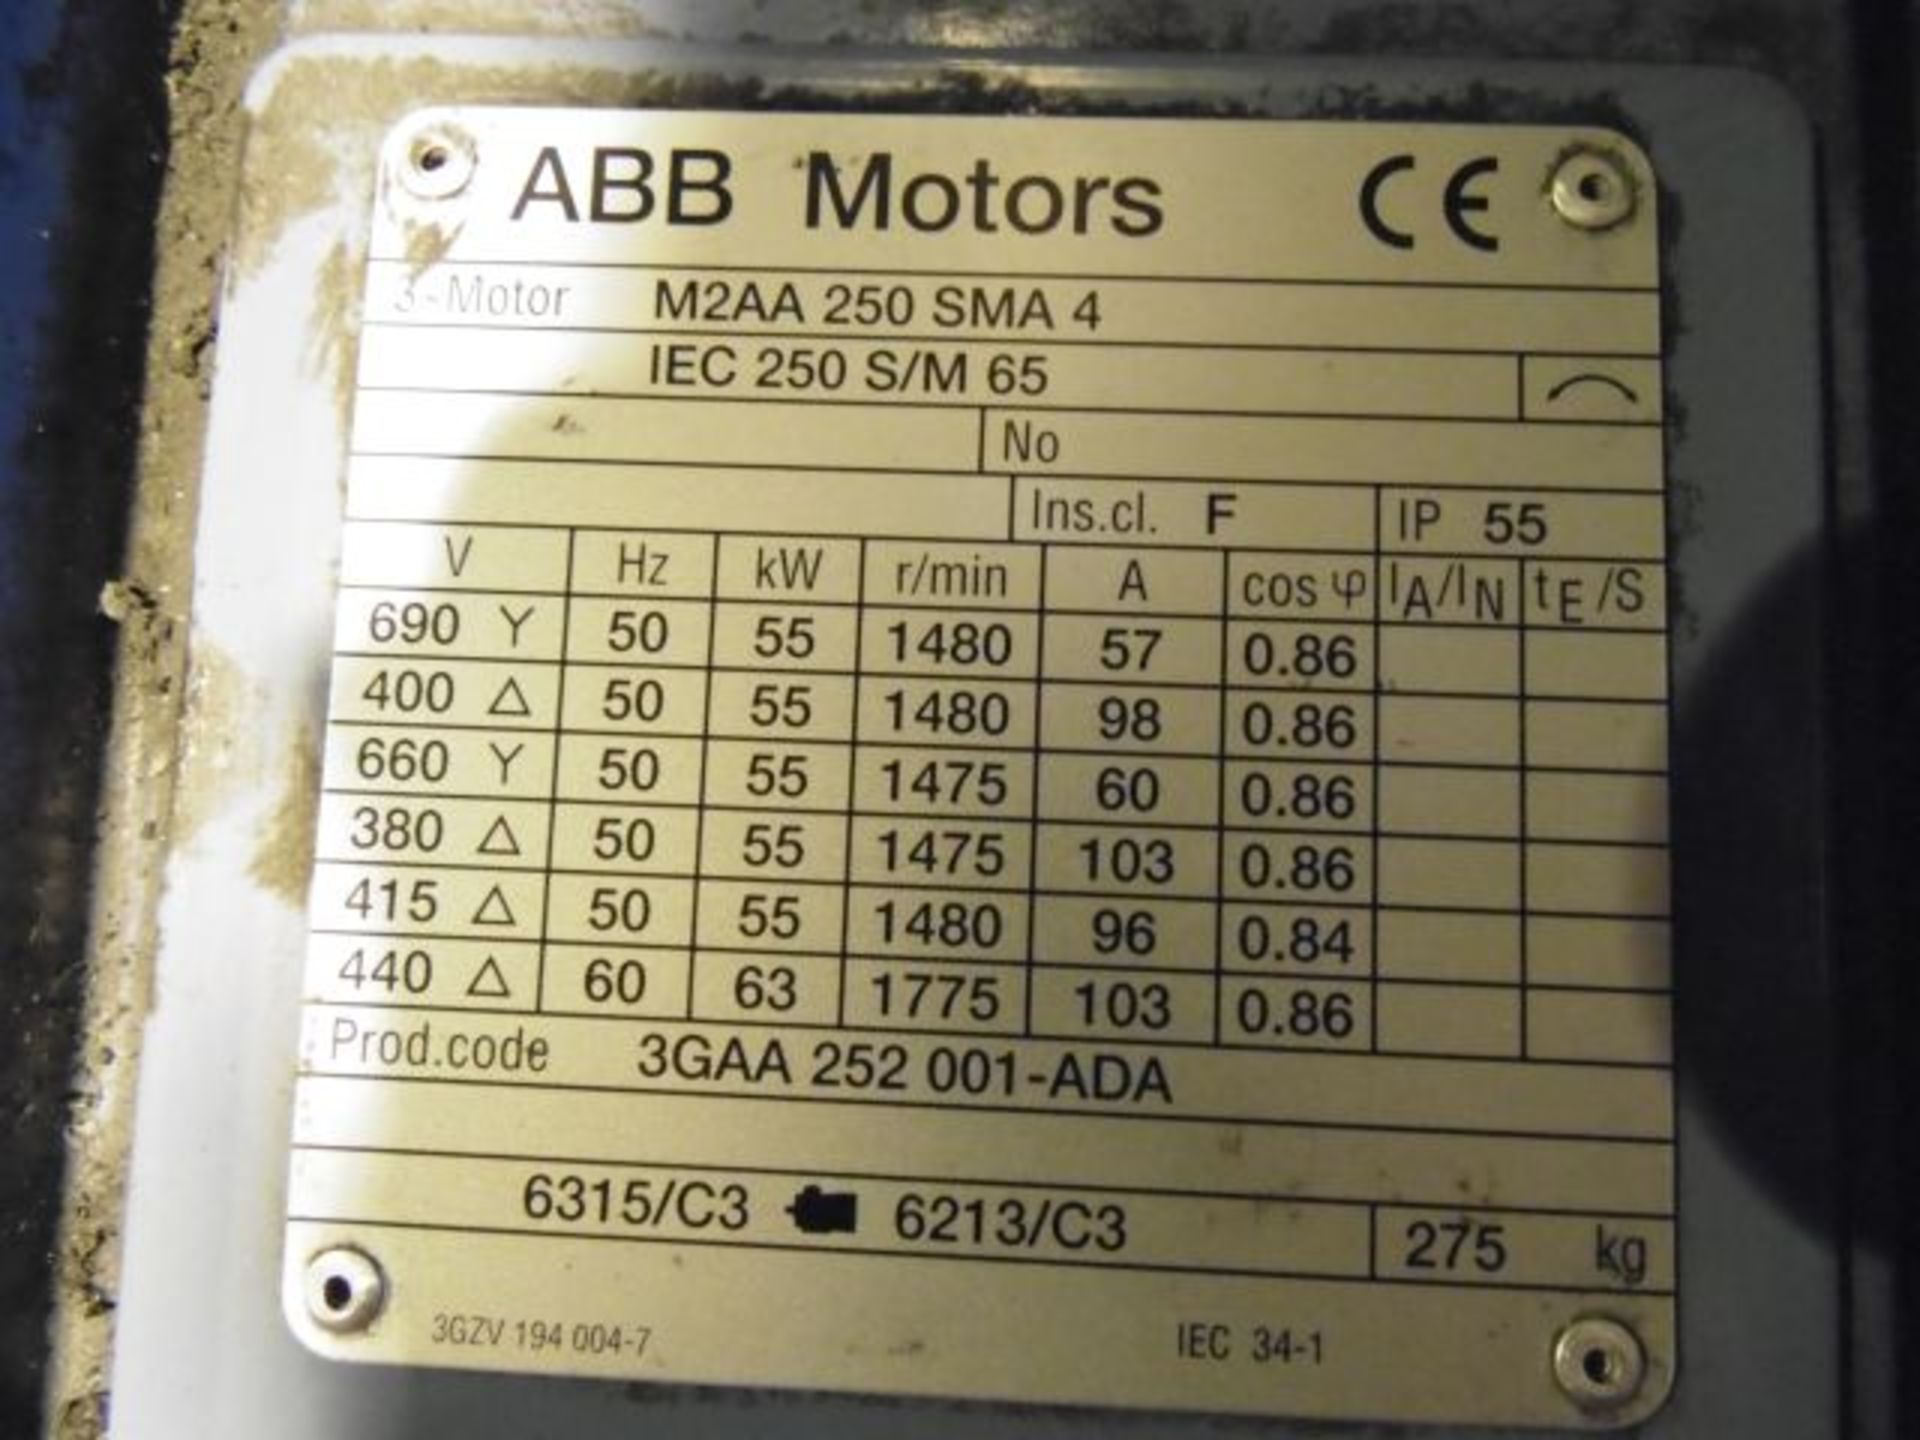 * ABB 55kw 3 Phase Motor; type M2AA 250 SMA4; 275kg; 1480 R/Min. Loaded onto Buyer's Transport - Image 2 of 2